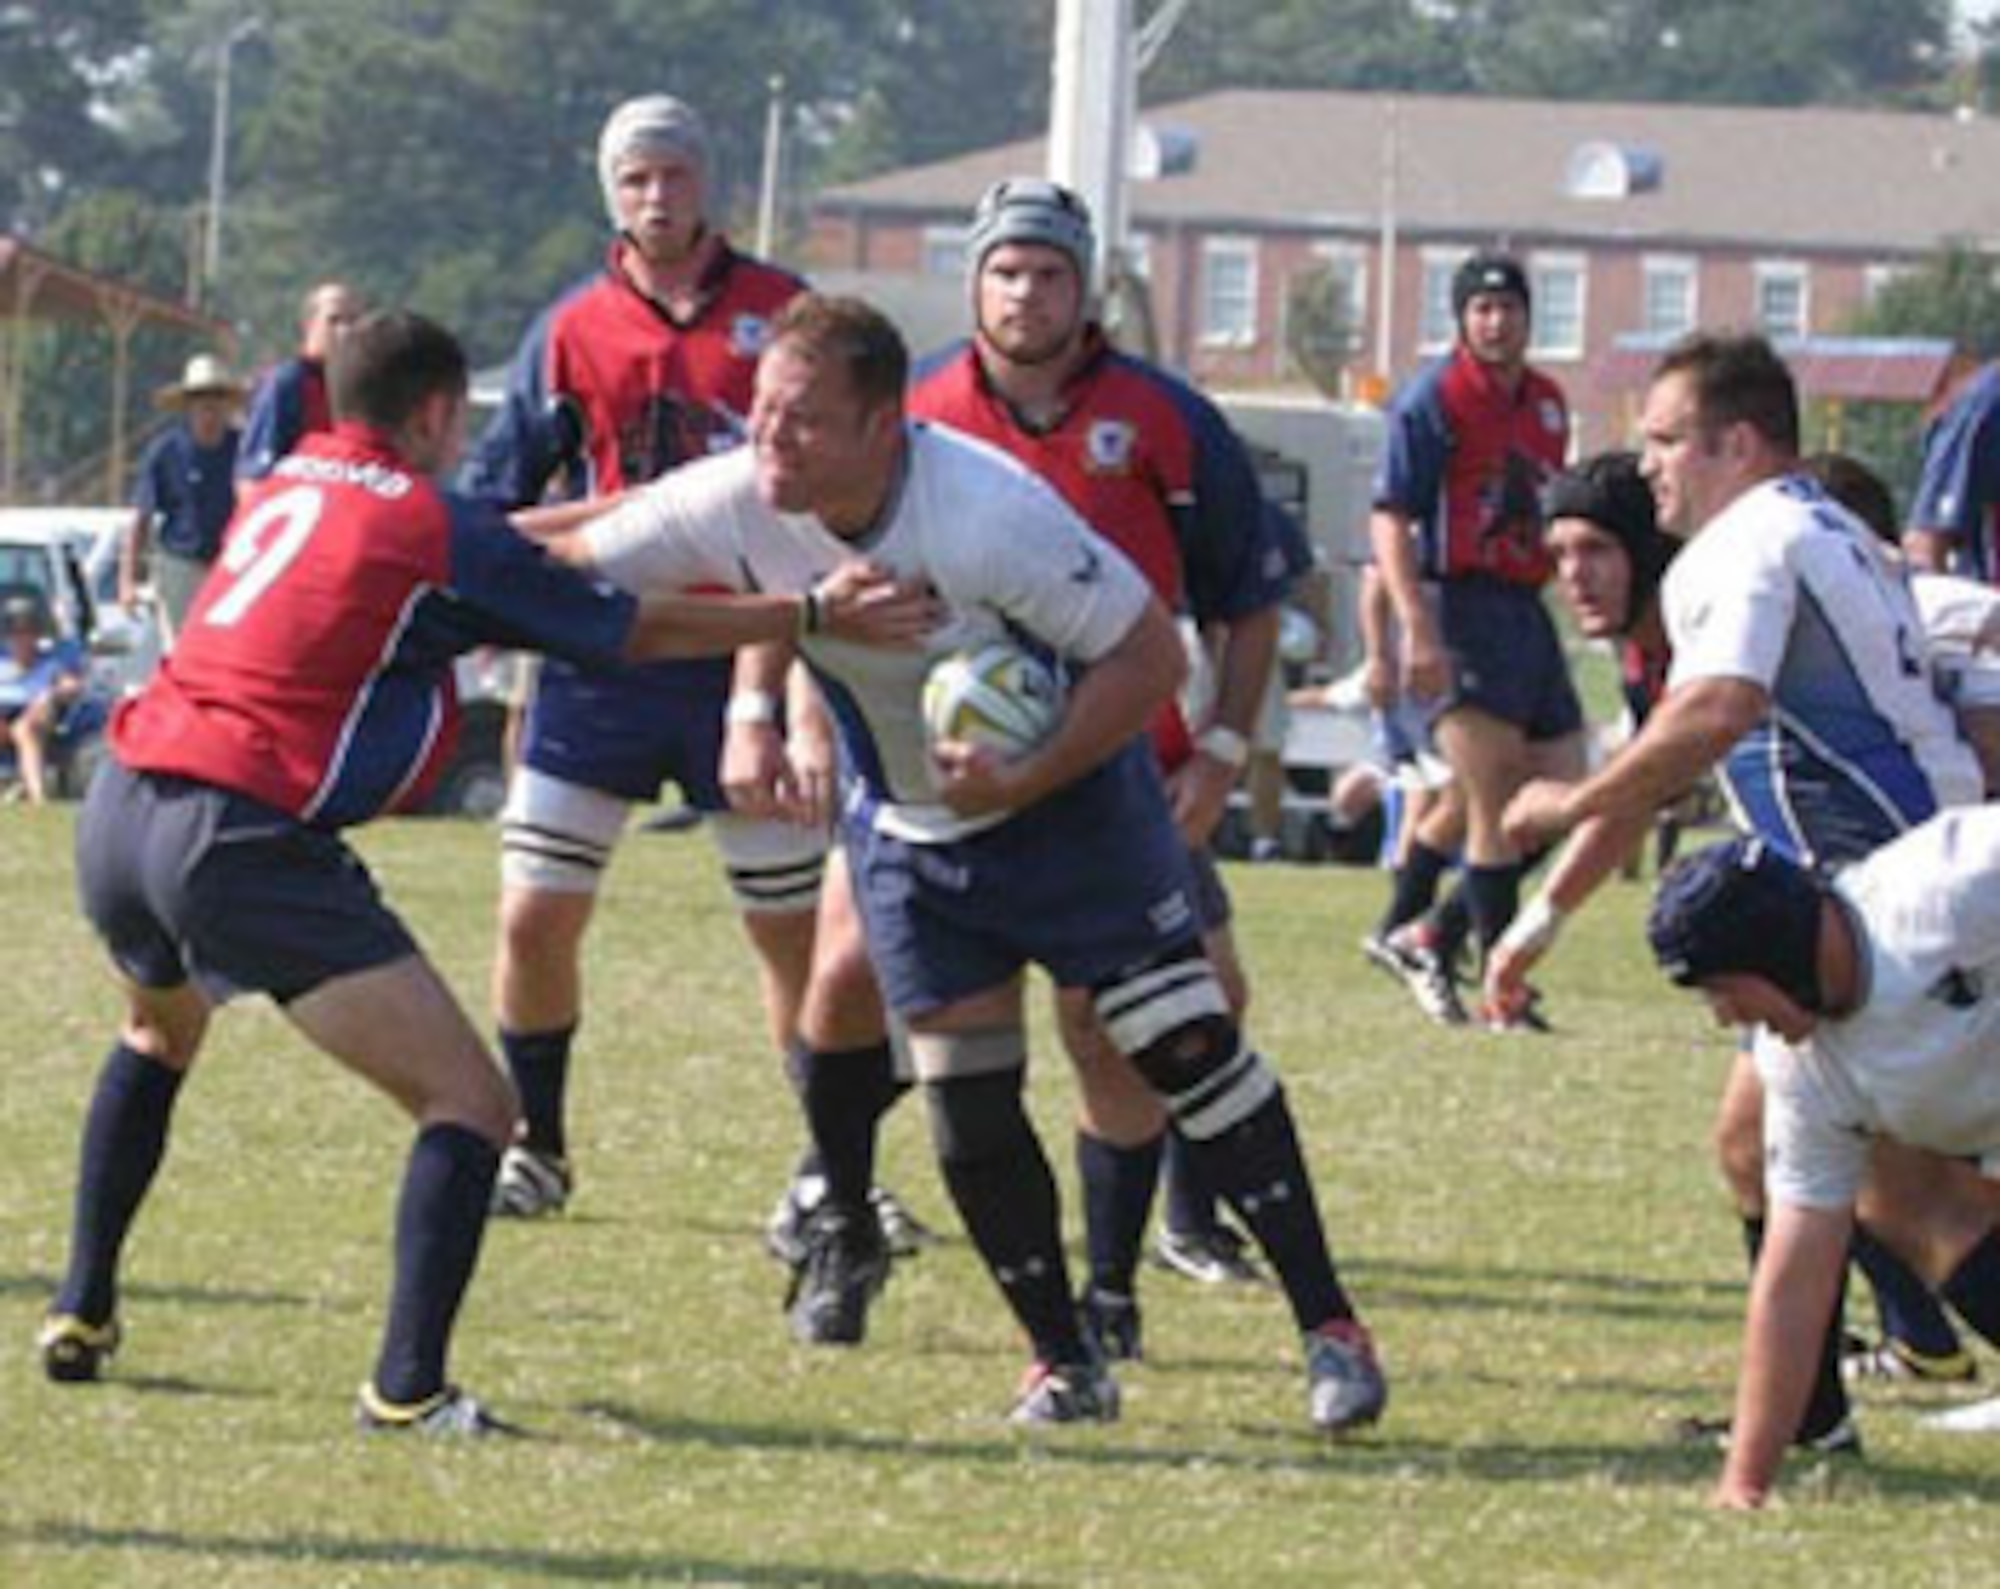 Senior Master Sgt. Jeremy Allen, shown here playing rugby, is the Tinker AFB “Athlete of the Year” for 2012. The sergeant, who serves in the 513th Aircraft Maintenance Squadron, participates in Armed Forces Rugby, base flag football and Tinker bowling, and mentors members of the 513 AMXS and his deployed unit, the 380th Expeditionary Aircraft Maintenance Squadron, in matters of wellness and physical fitness. (Courtesy photo)